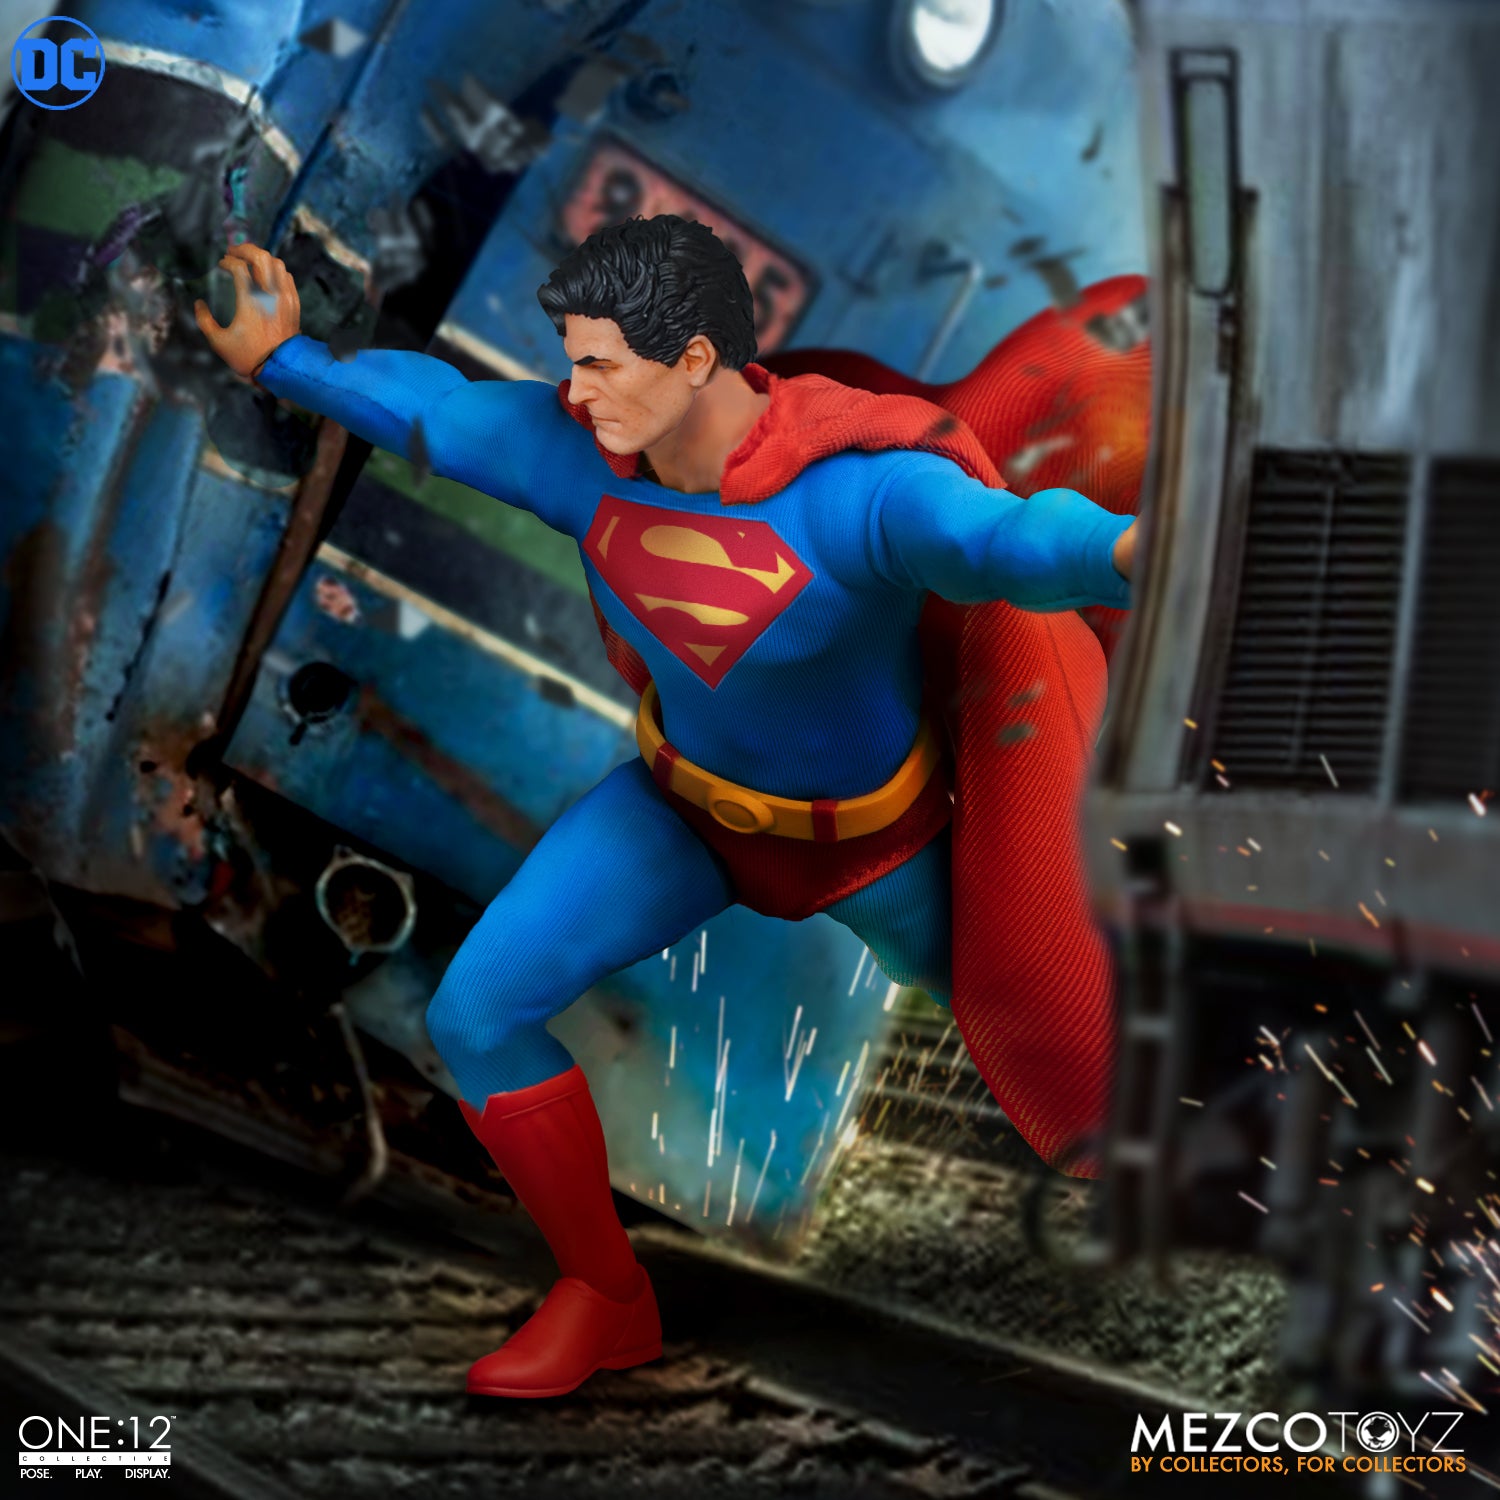 Superman Man of Steel edition One:12 Collective action figure